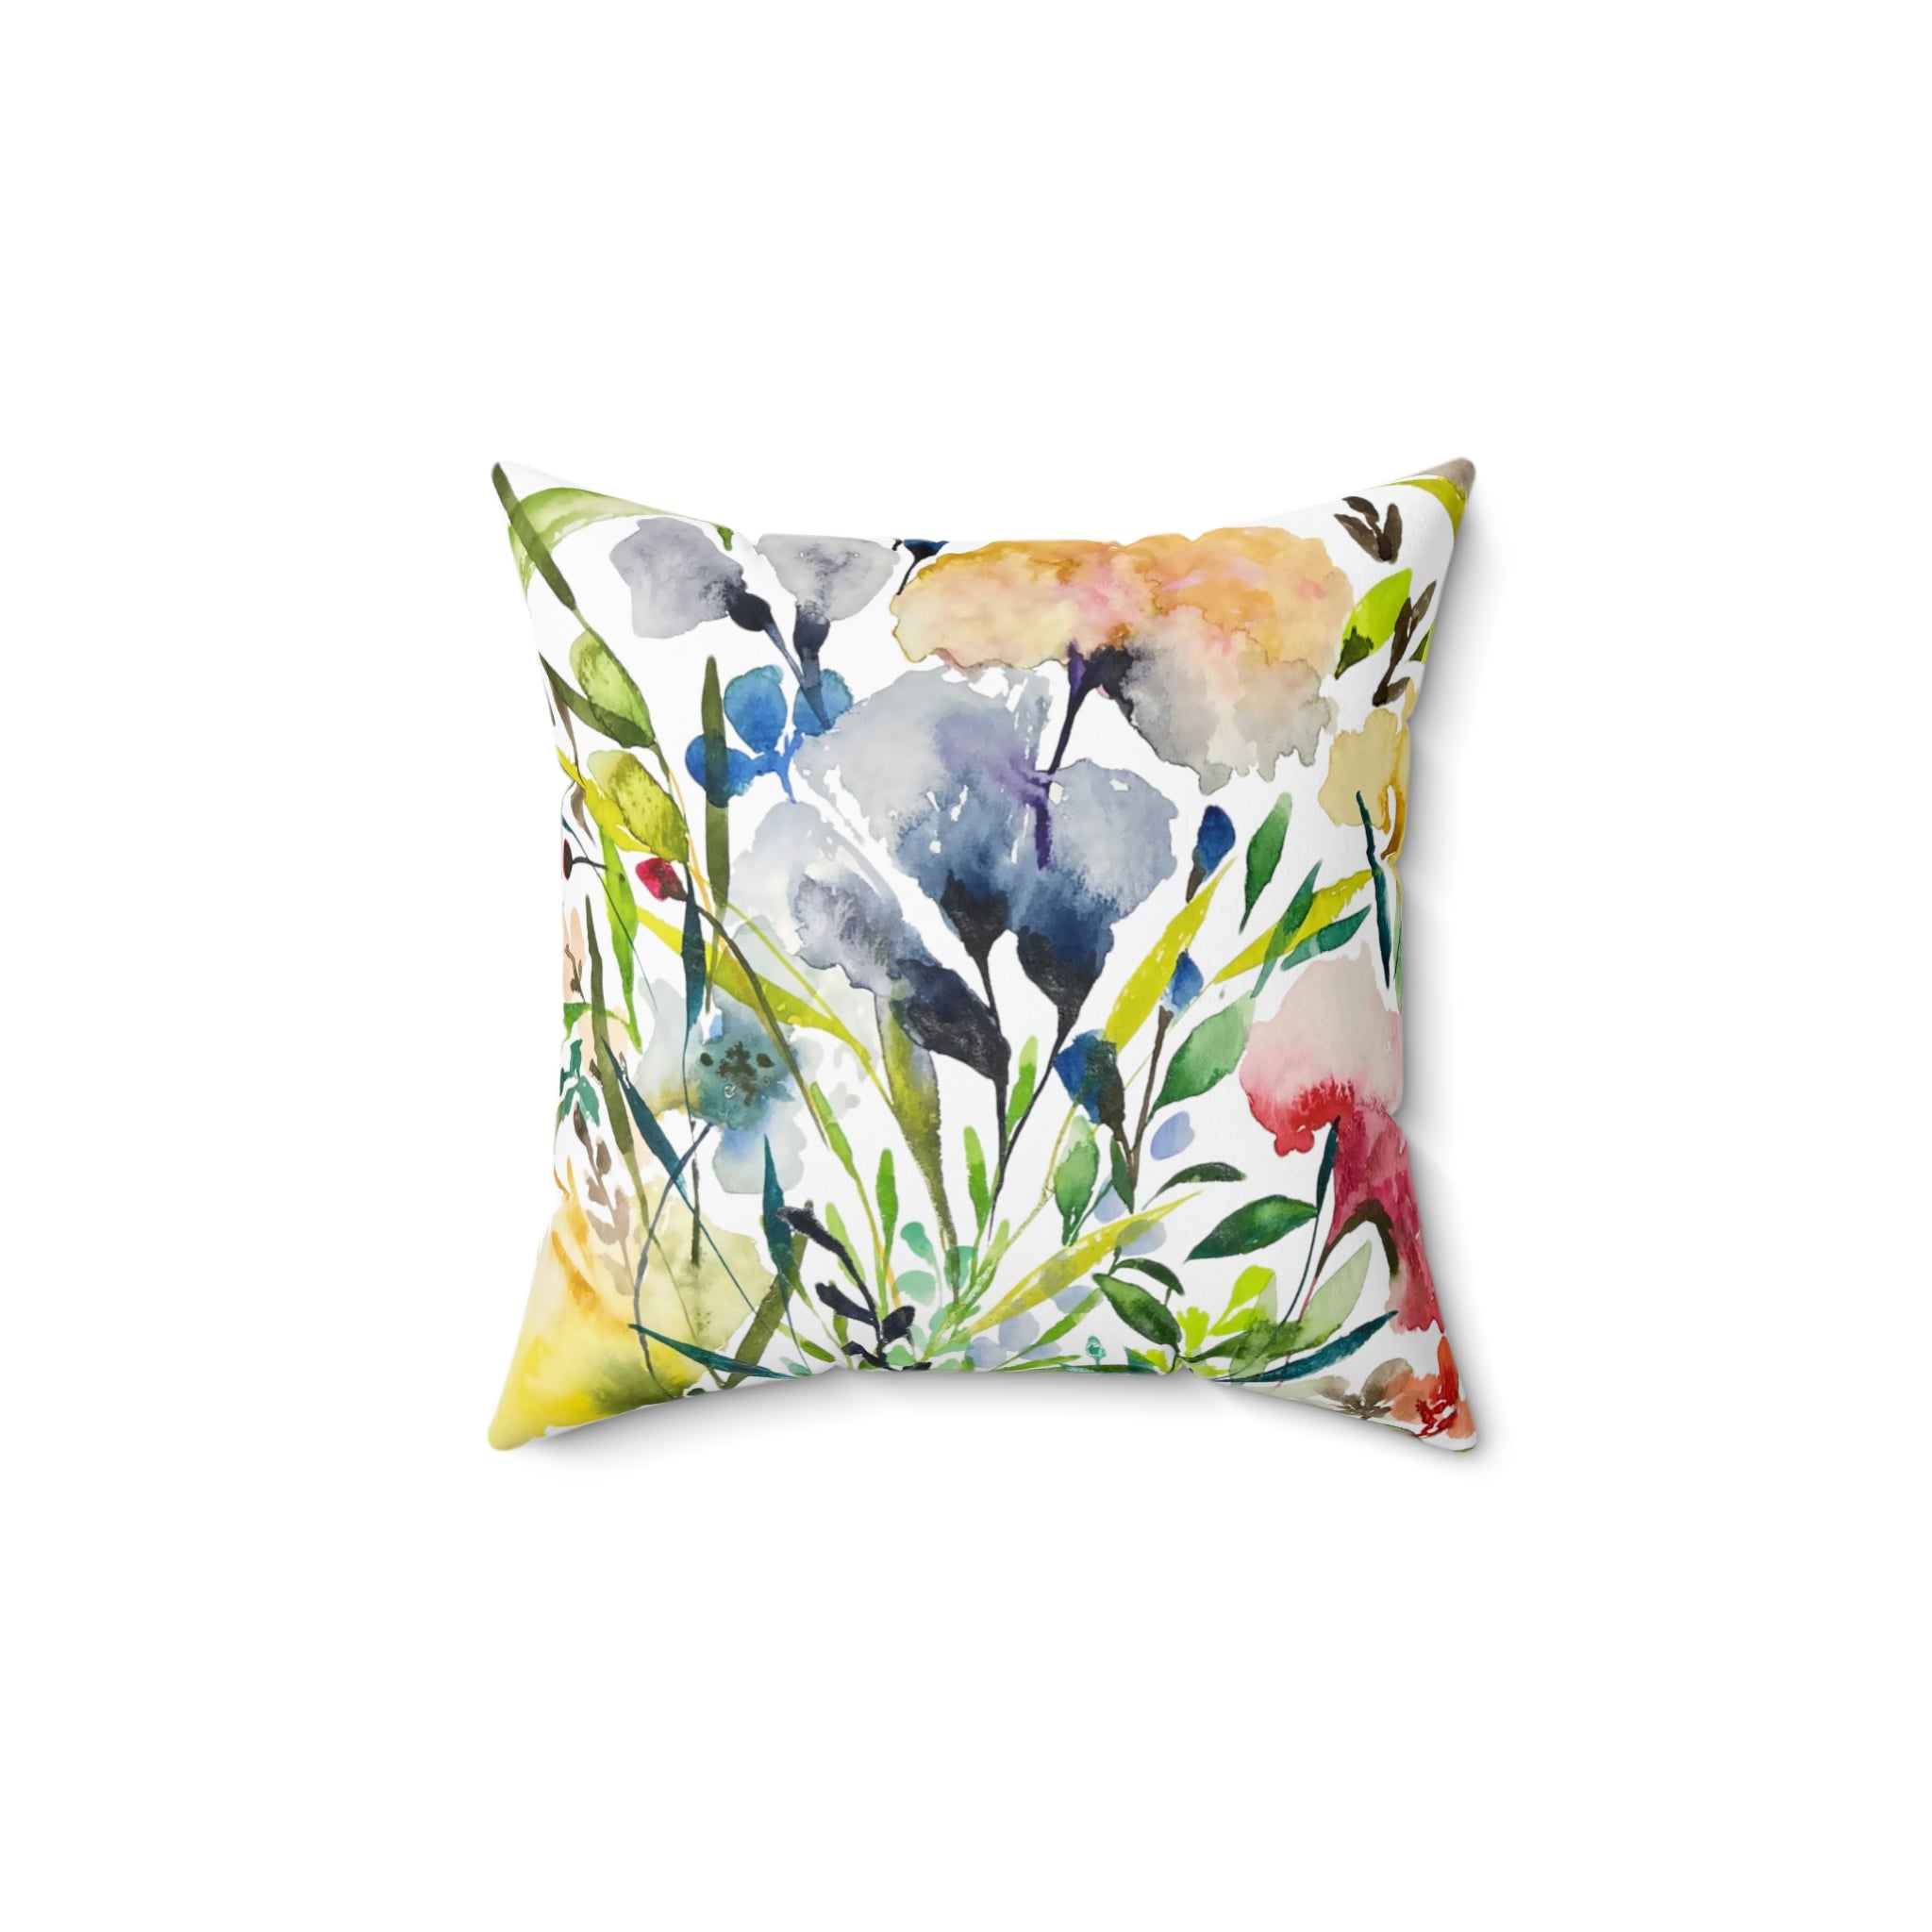 Flowers #4 Botanical Print on Throw Pillow Cover